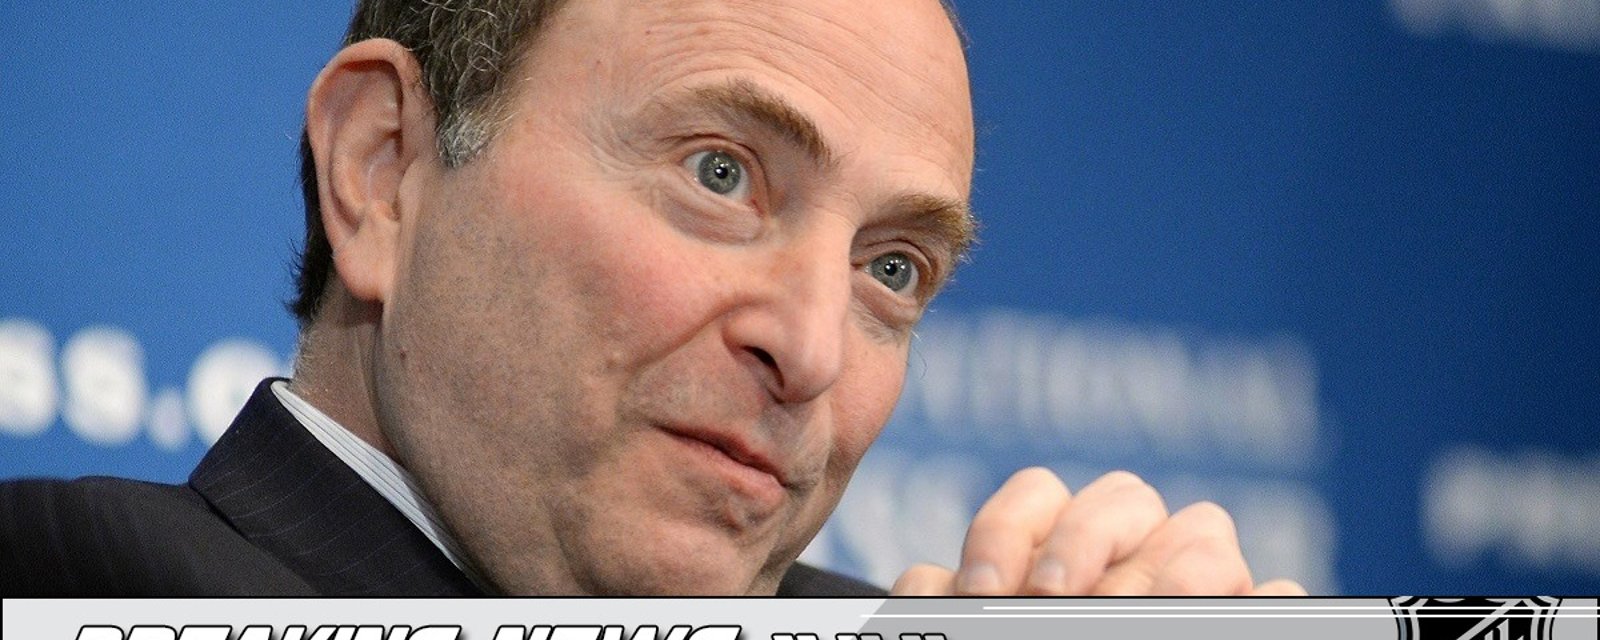 Breaking: Gary Bettman confirms plans for very interesting new arena deal.